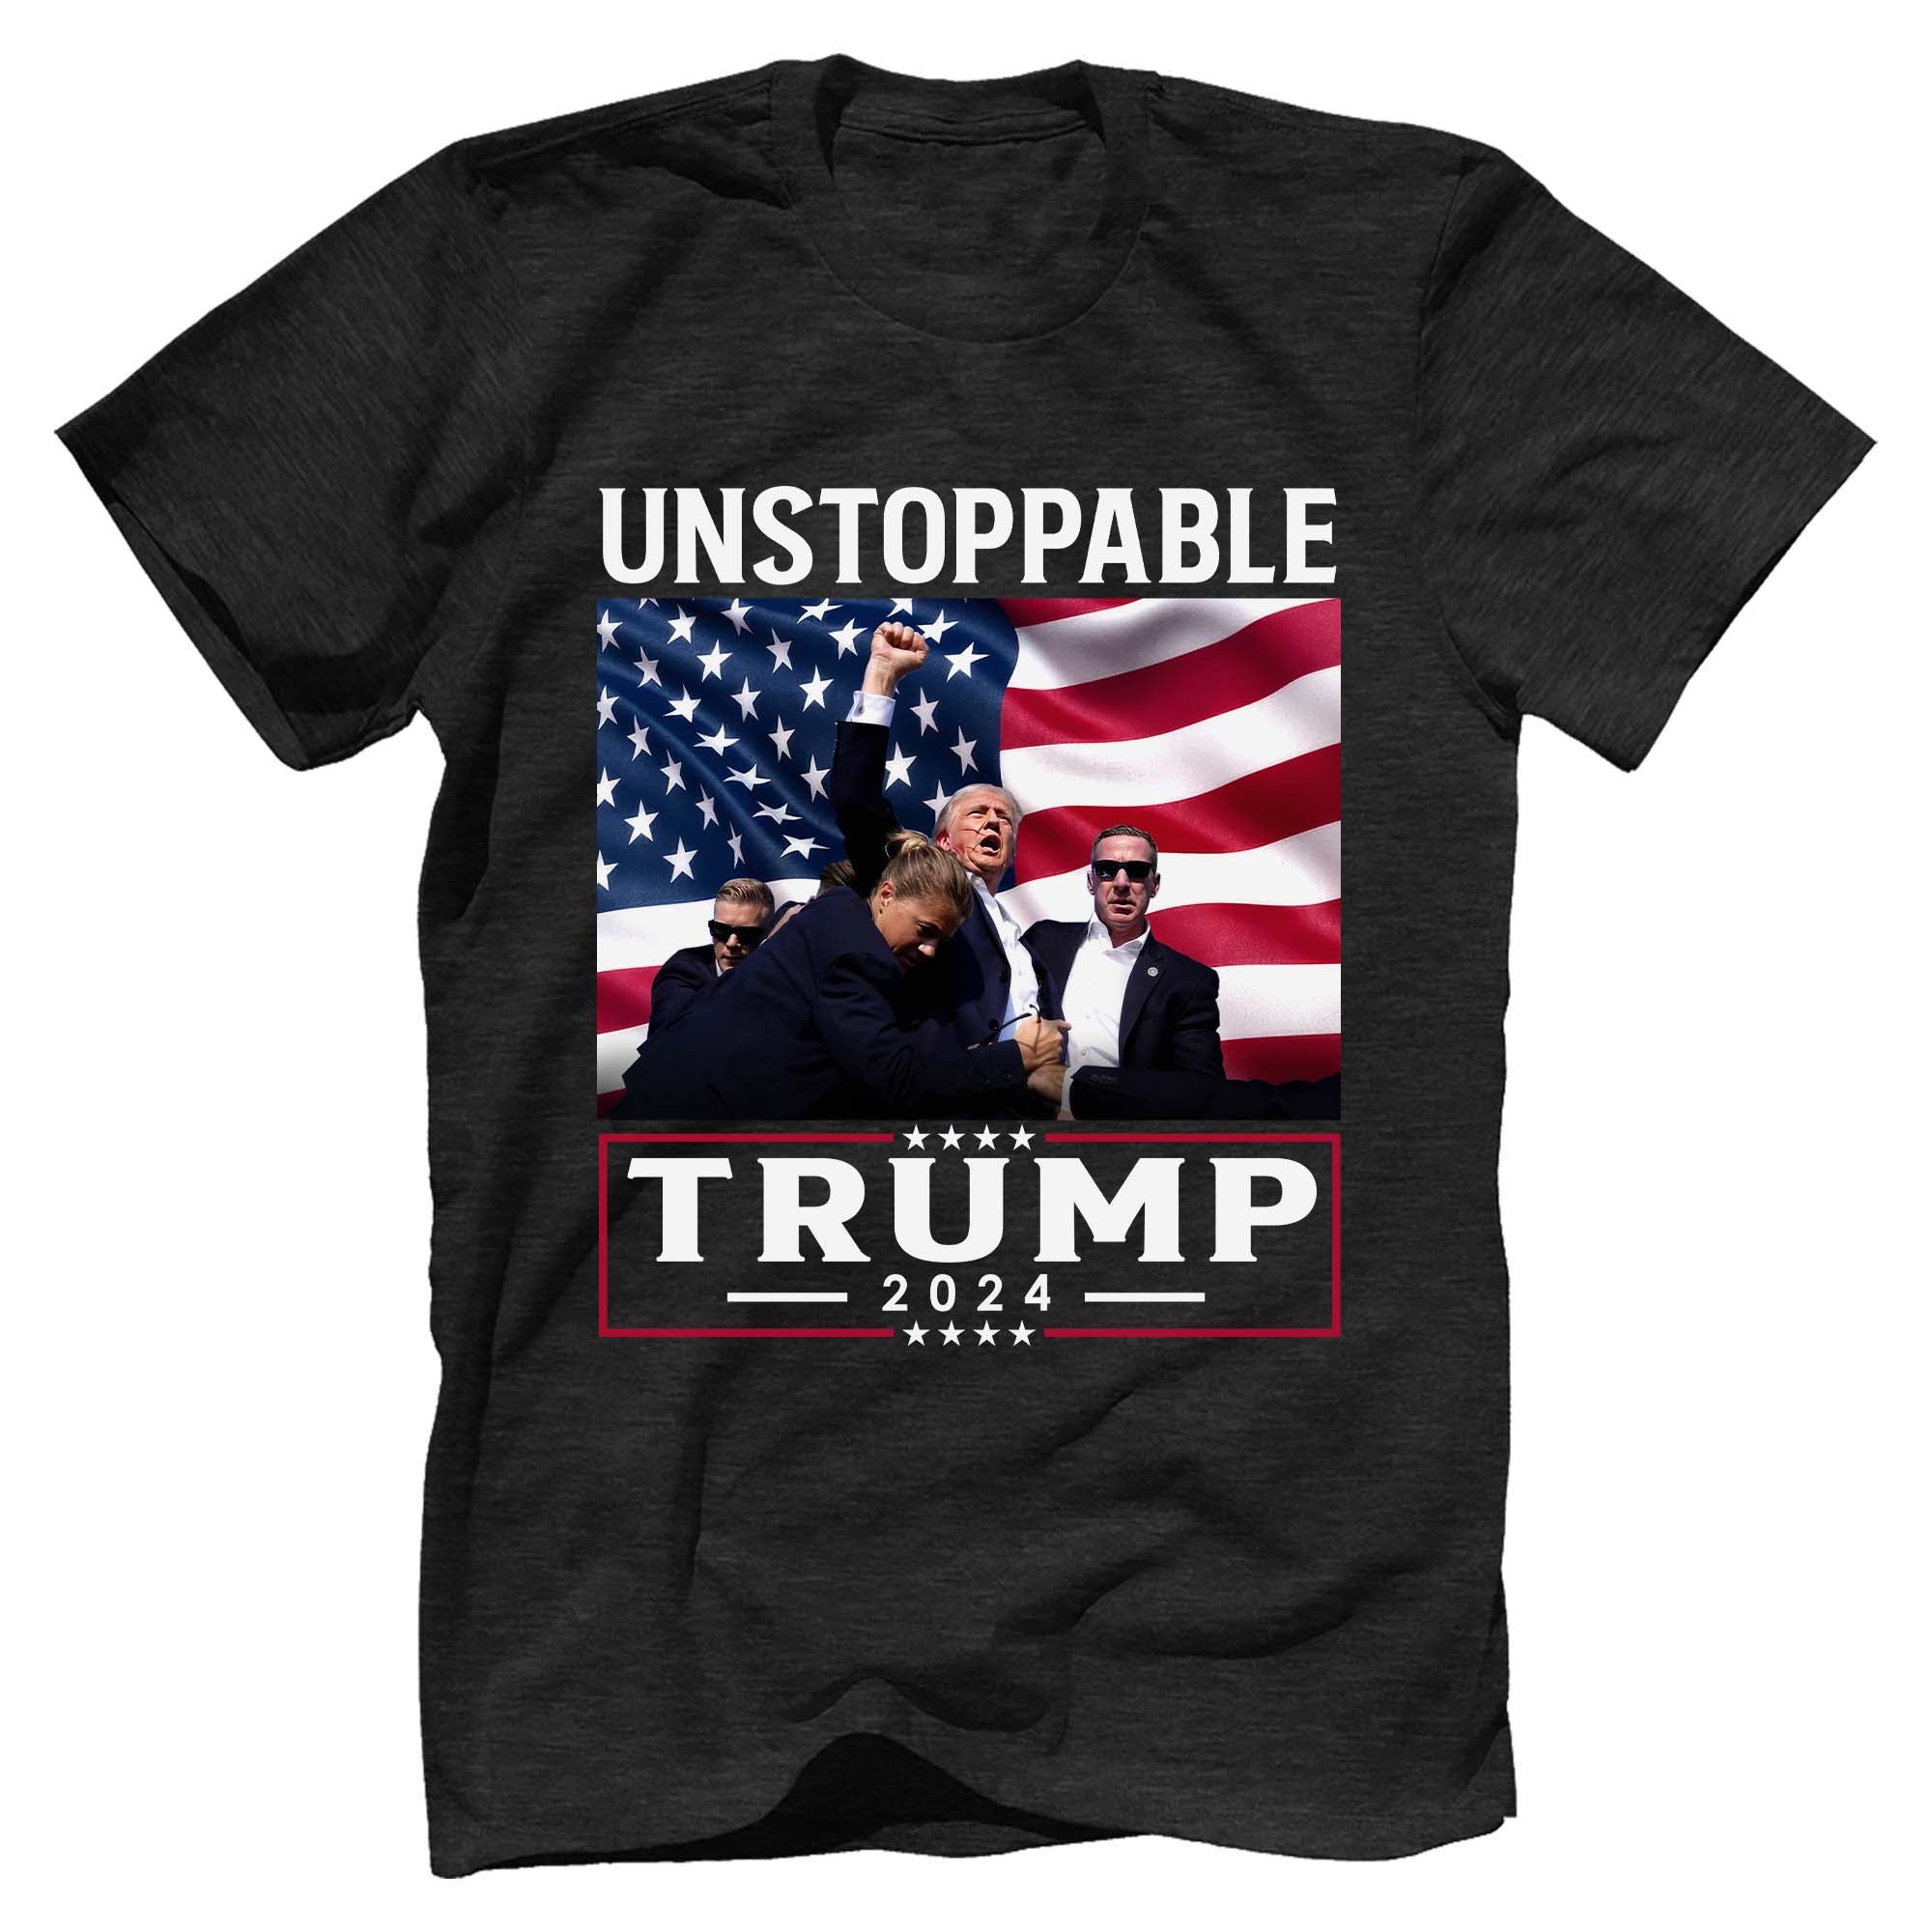 Unstoppable Our President Trump T-Shirt - GB94